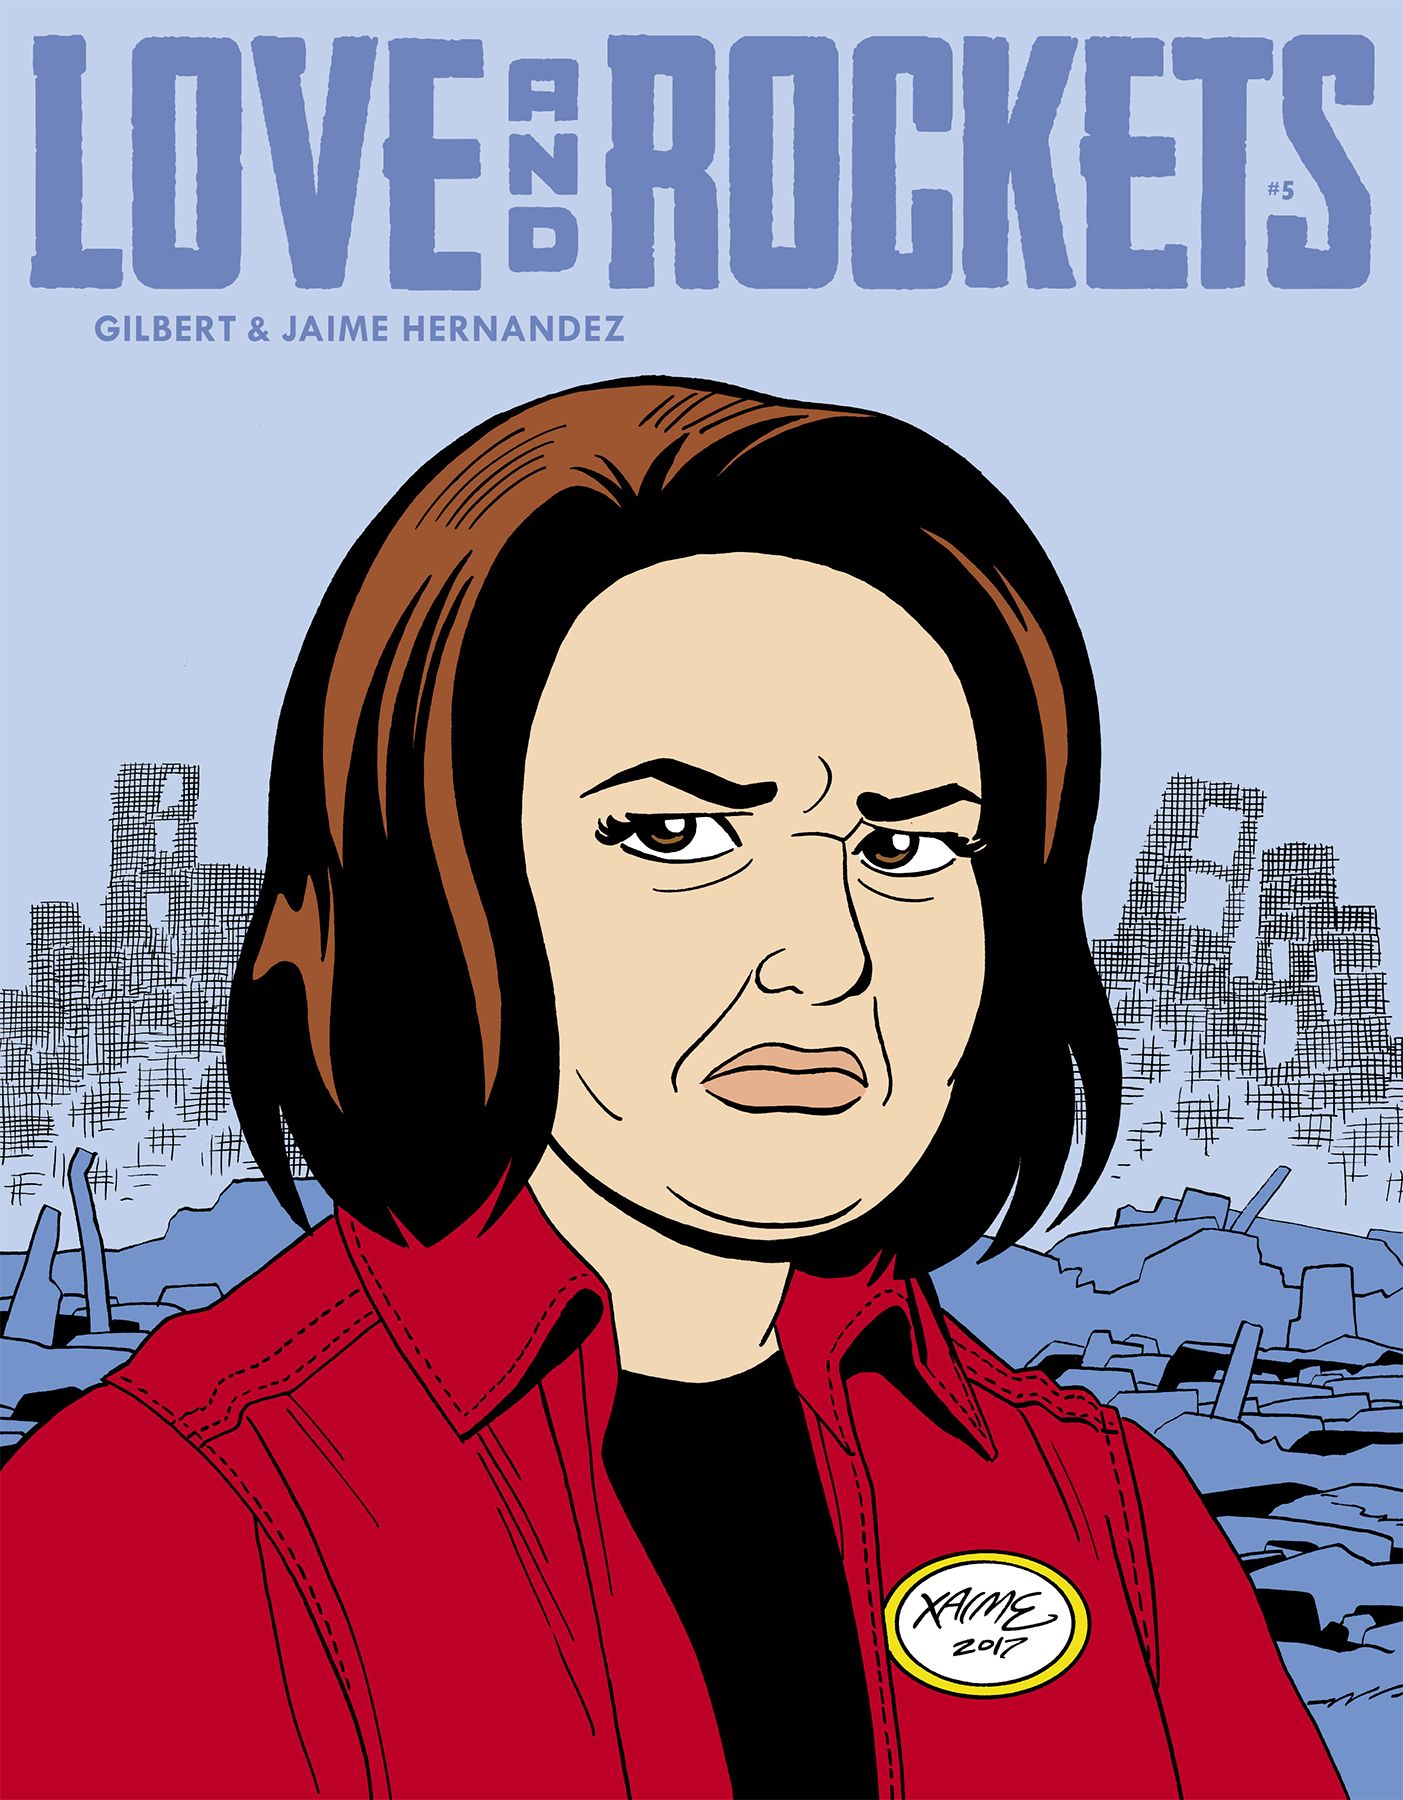 Love and Rockets #5 Comic